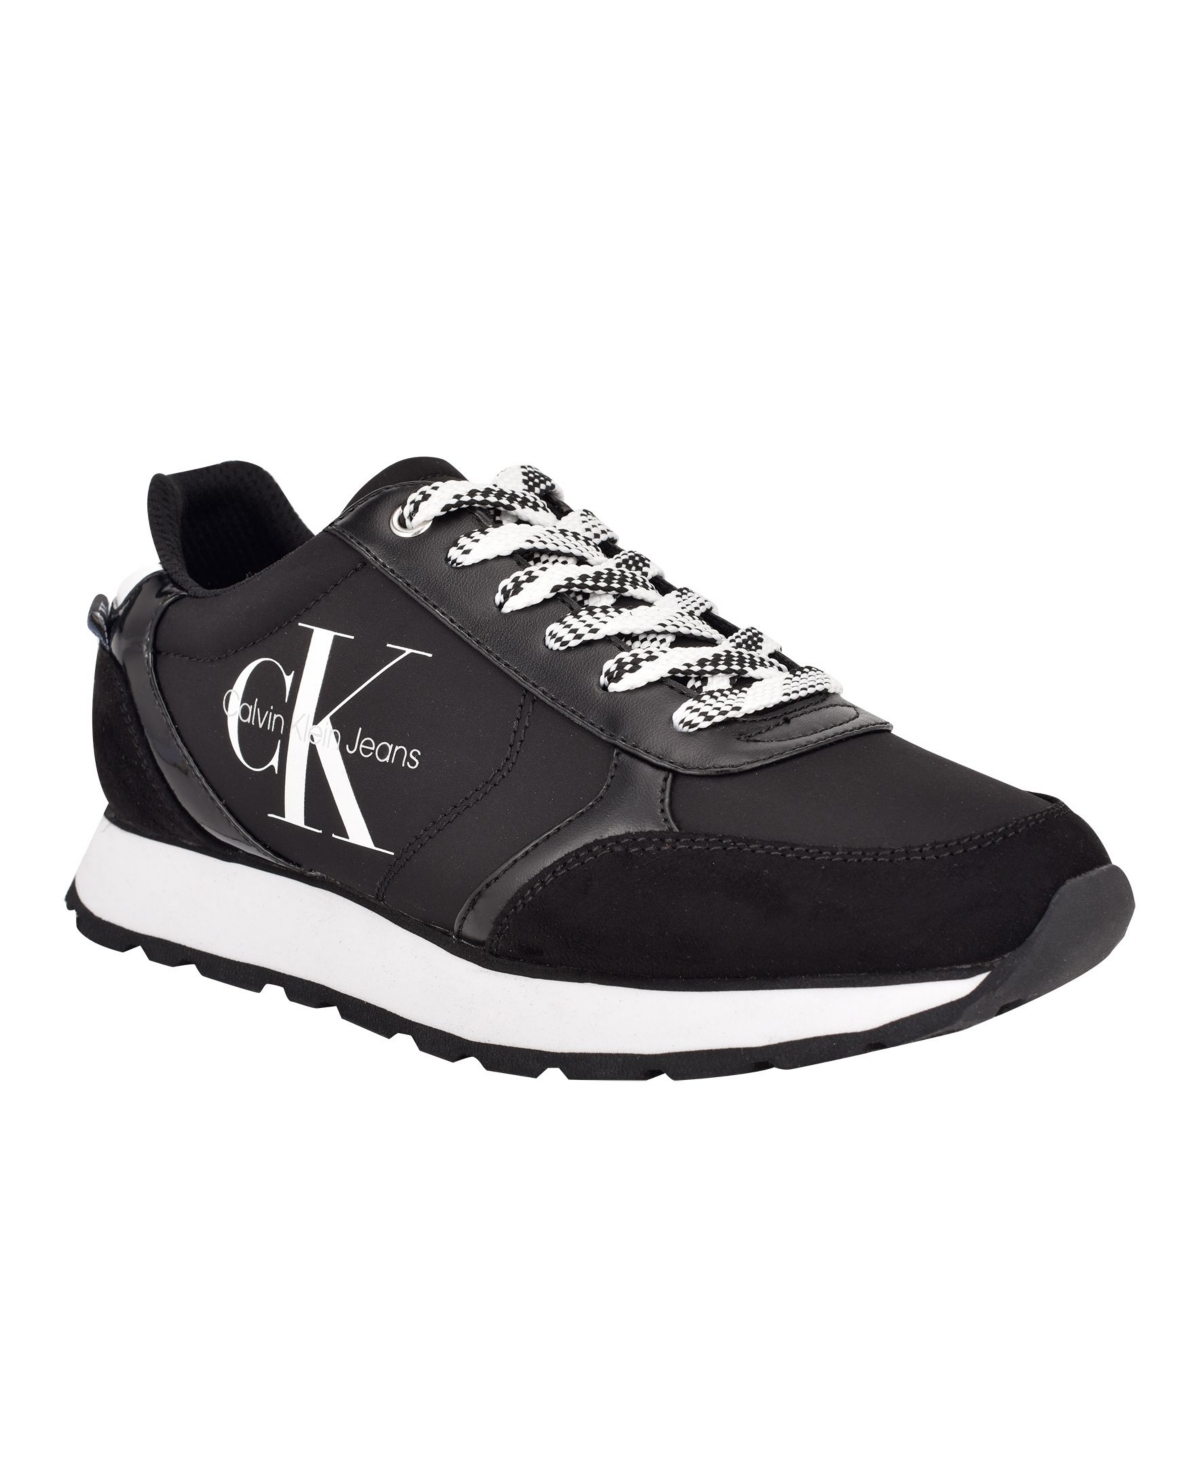 UPC 195182393207 product image for Calvin Klein Jeans Women's Cayle Logo Casual Lace-Up Sneakers Women's Shoes | upcitemdb.com